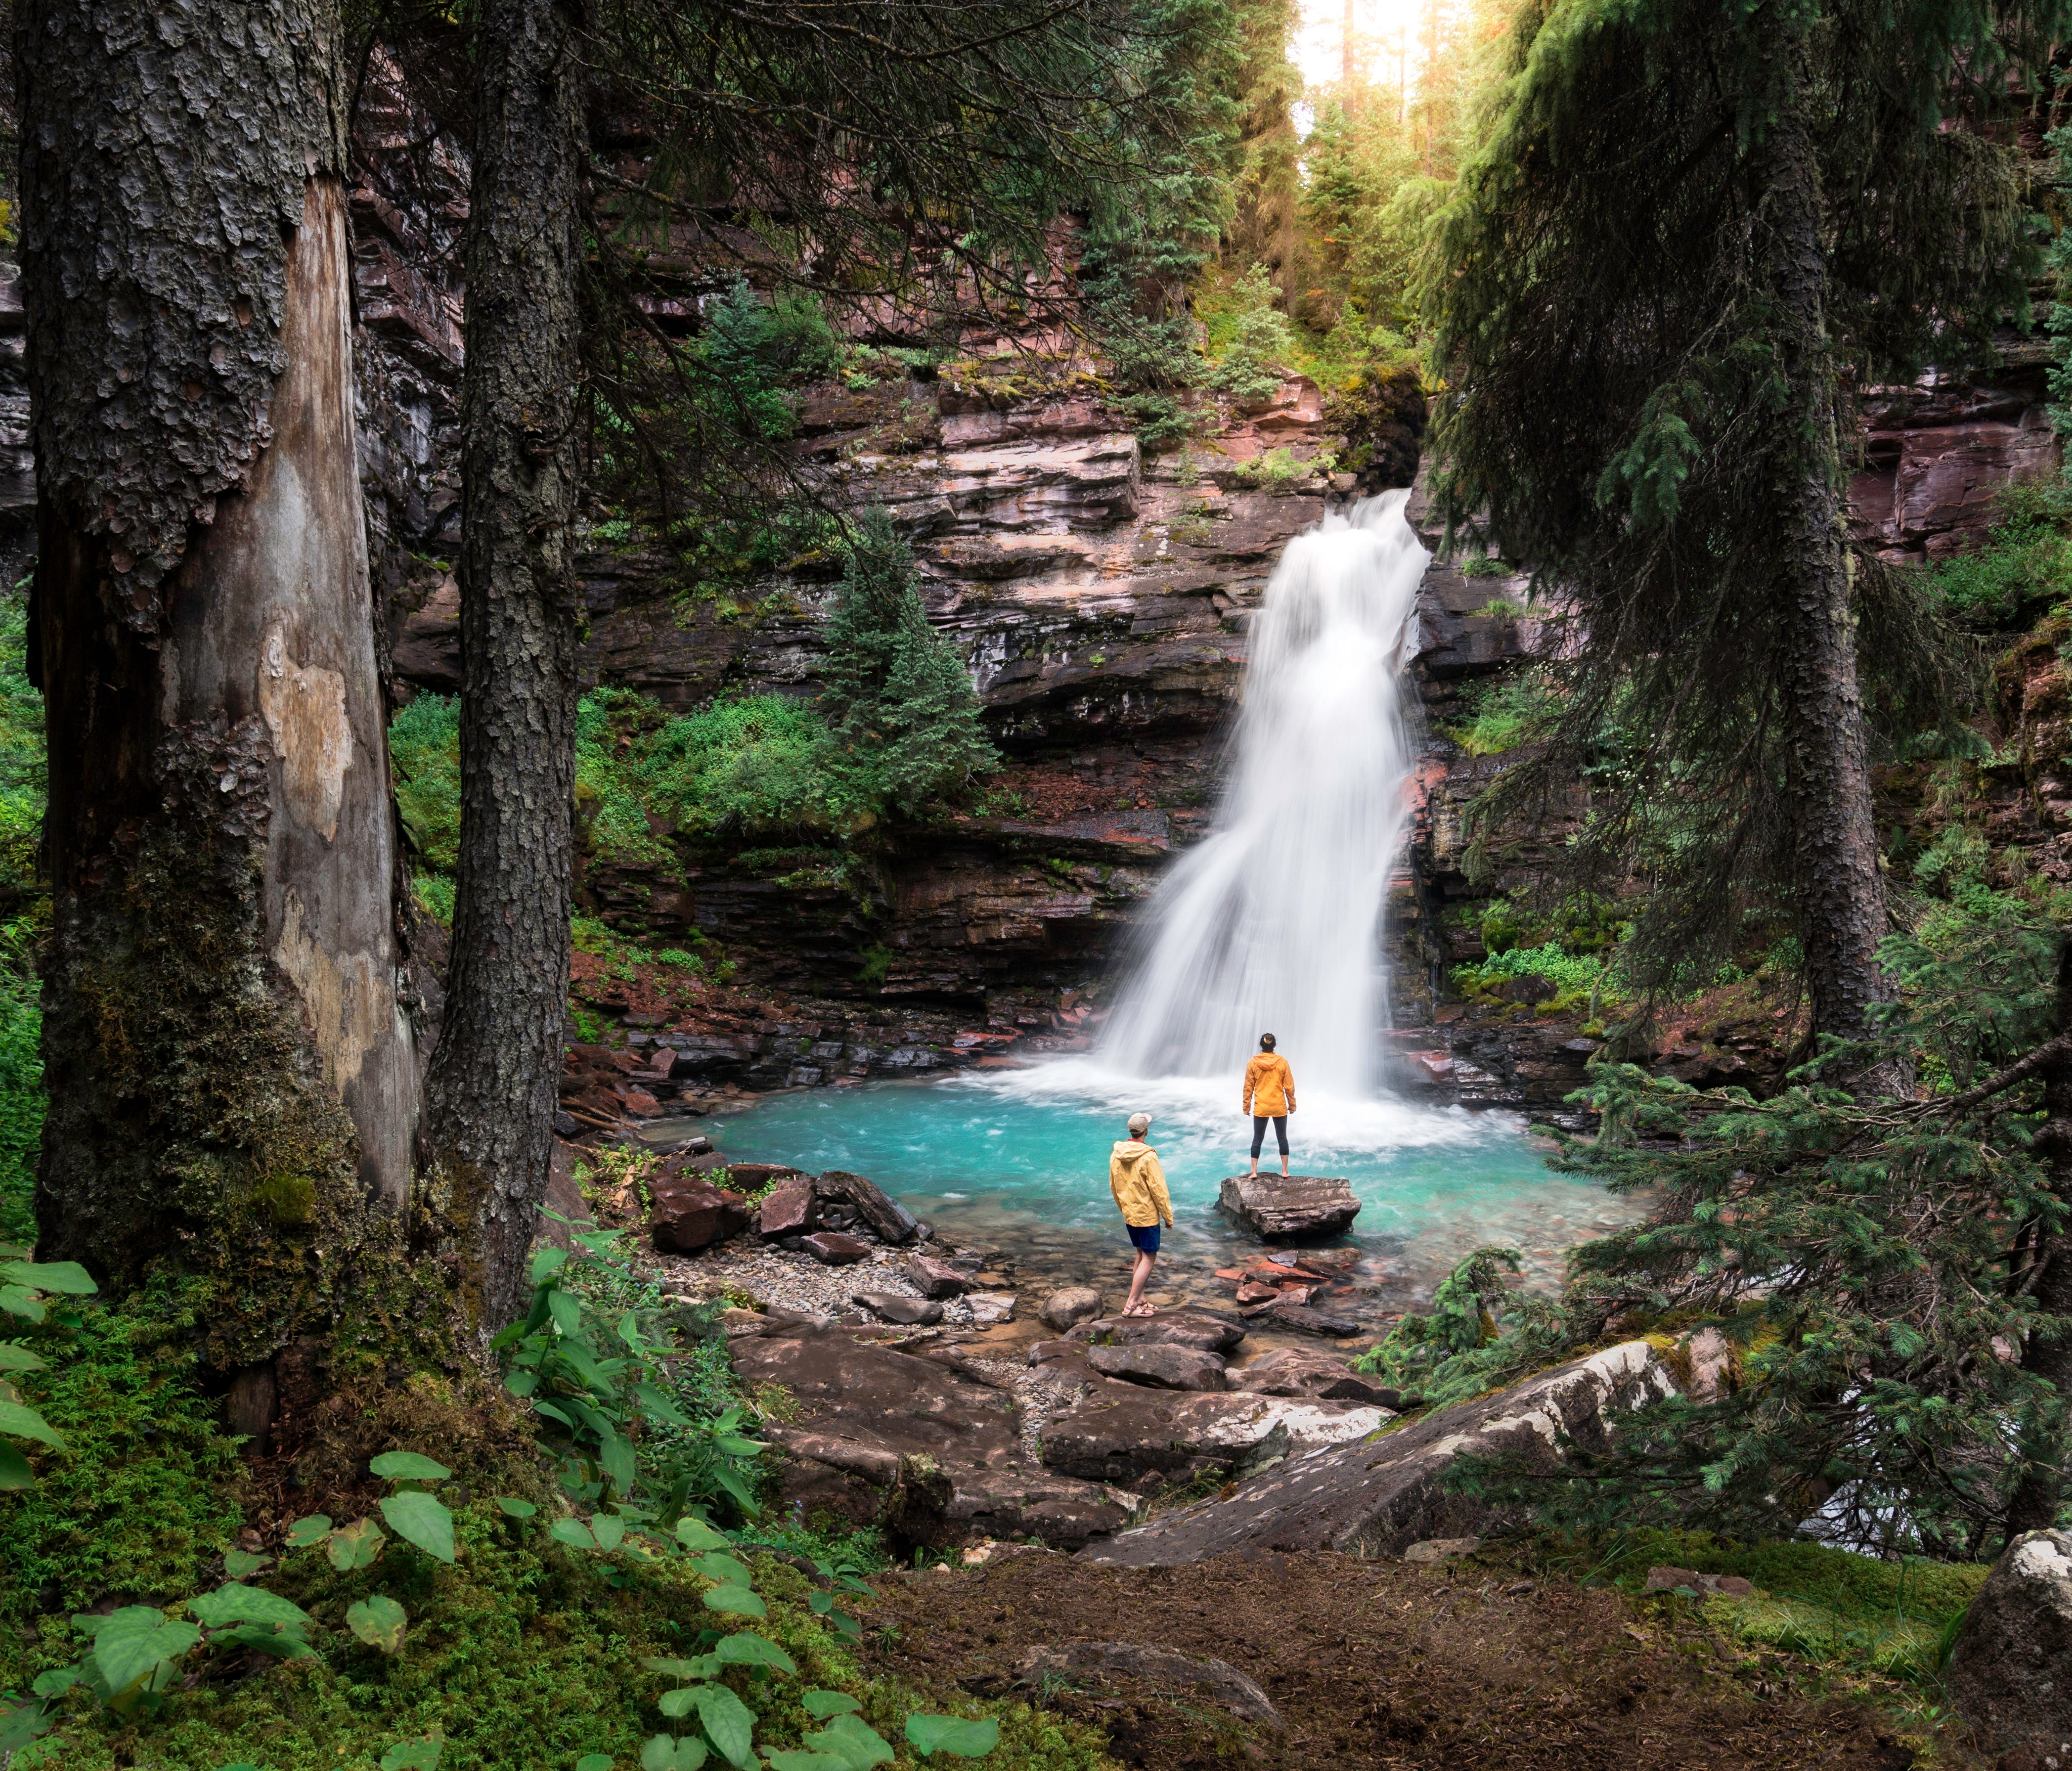 Two waterfalls that are worth checking out this spring in Colorado are South Mineral Creek Falls near Durango and Silverton ...